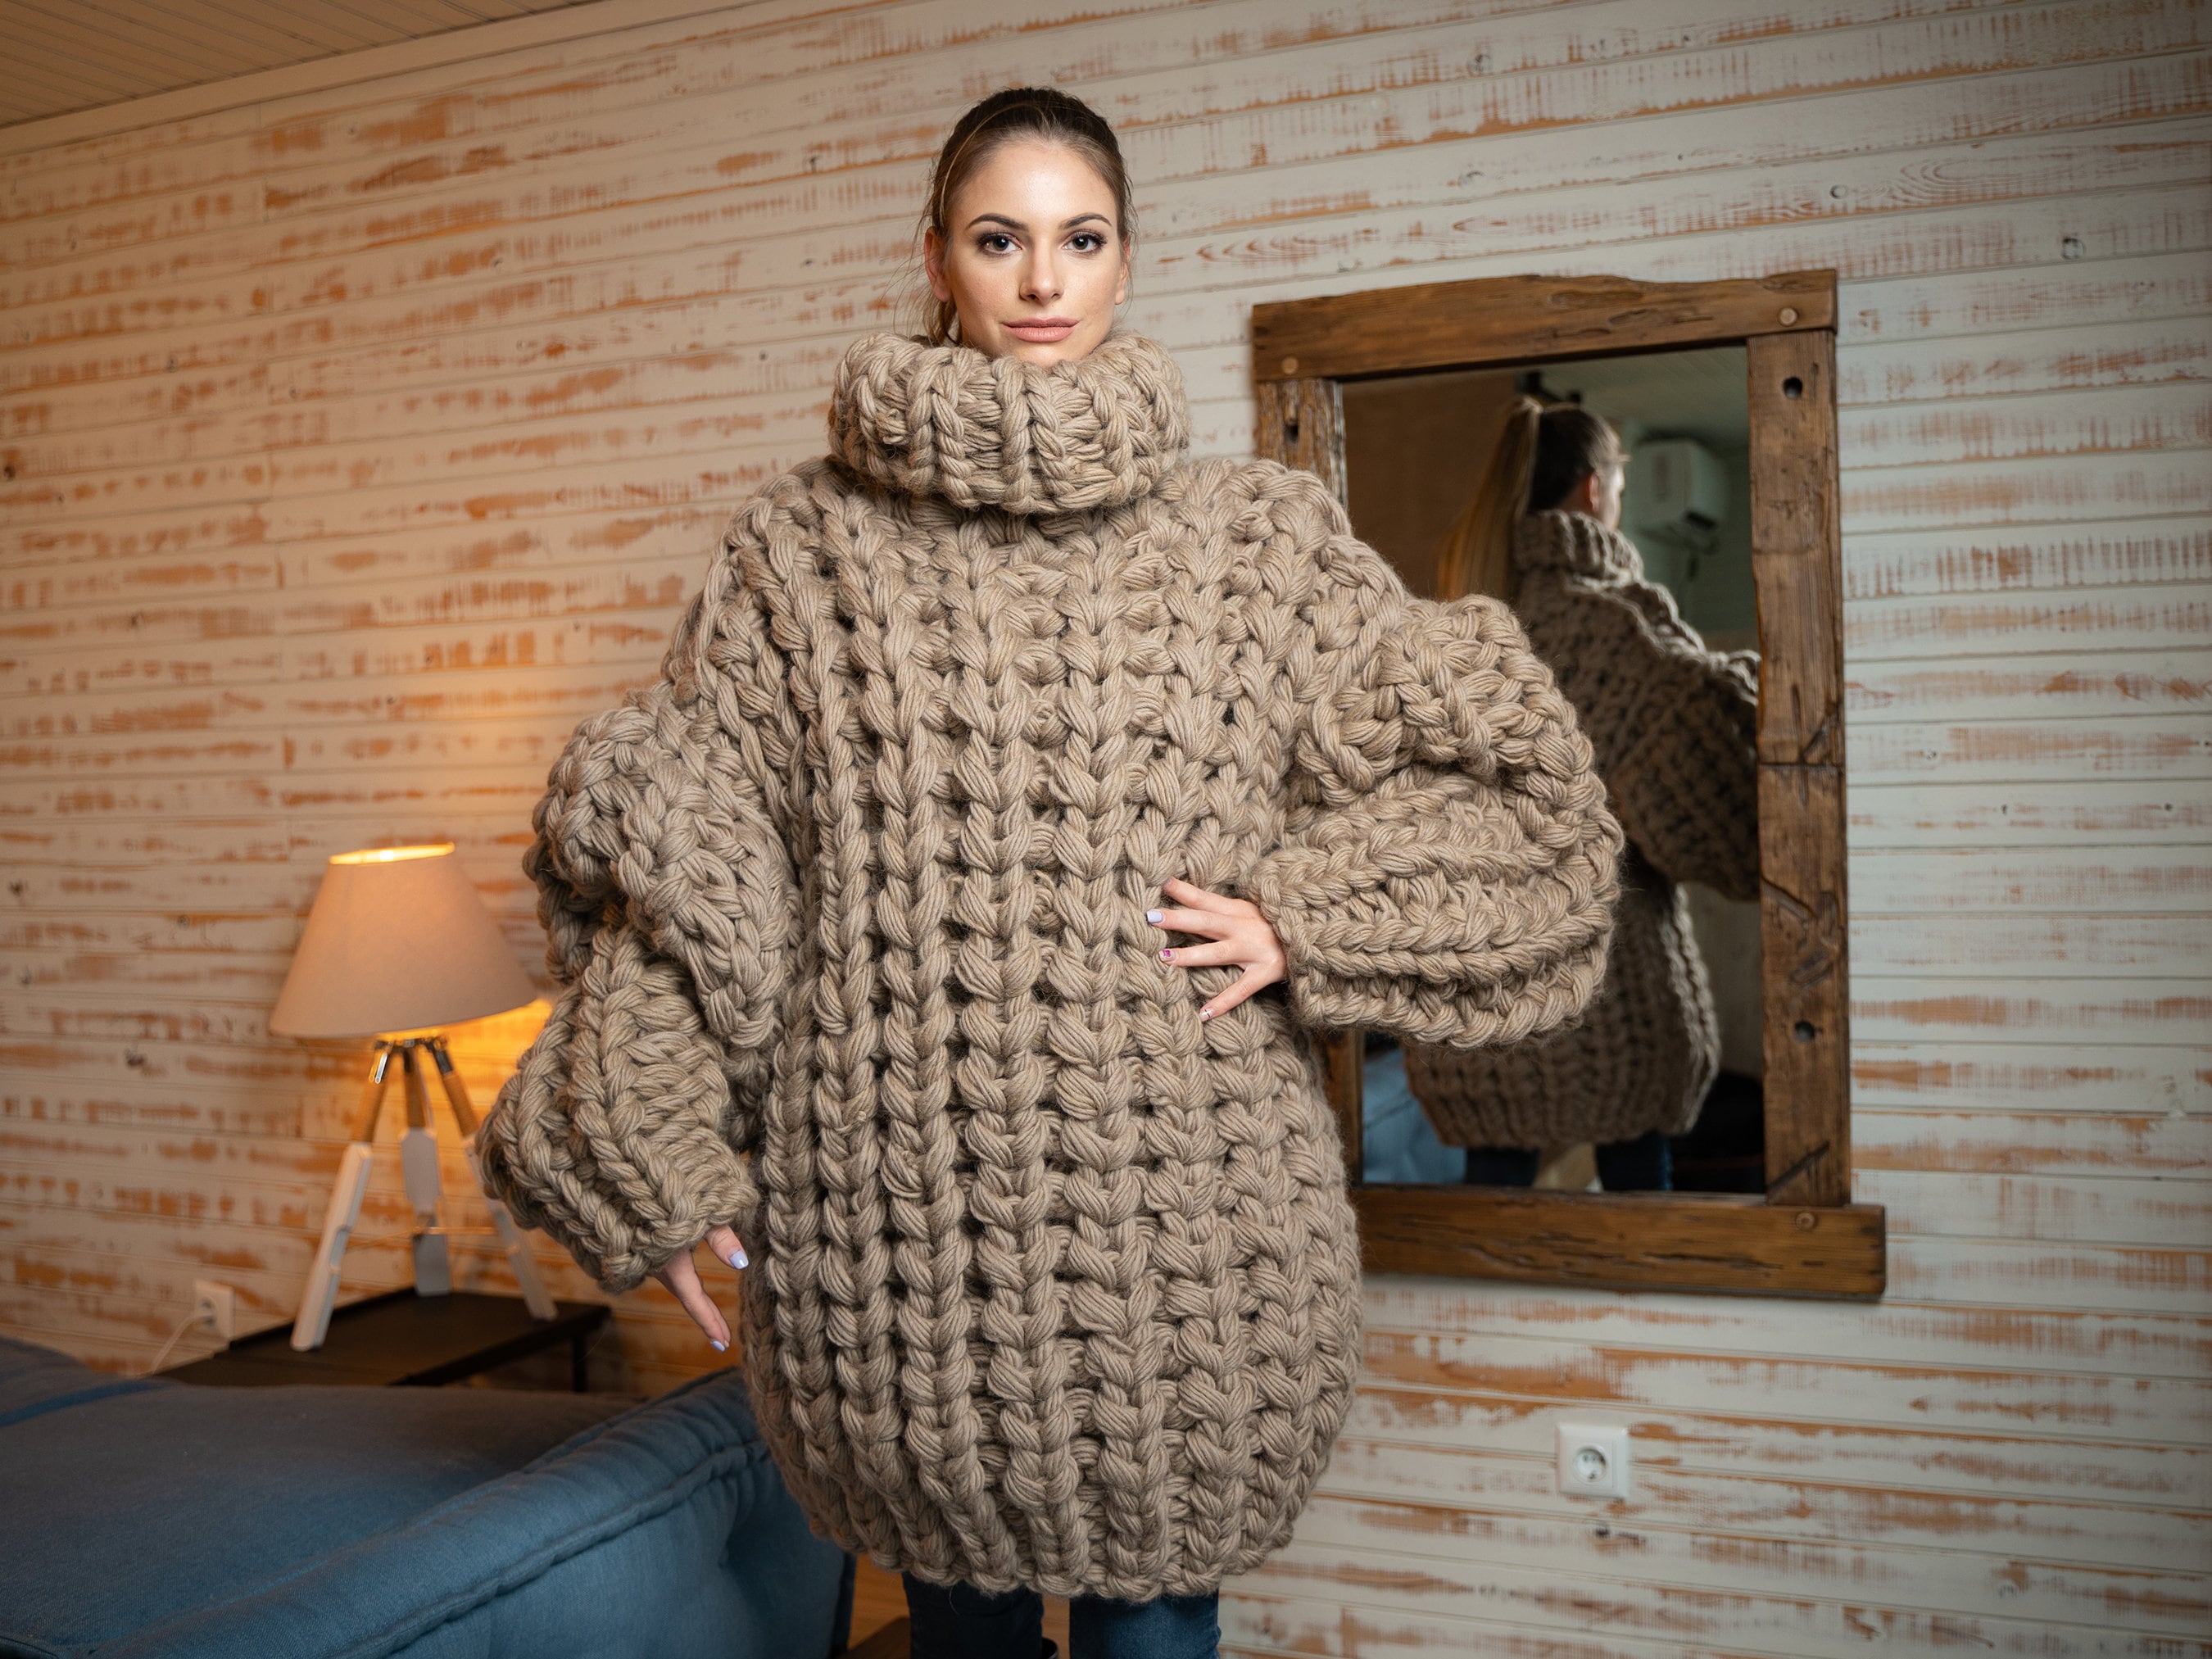 6 Kilograms Huge Hand Knit Wool Sweater Made of 100 % Soft Wool